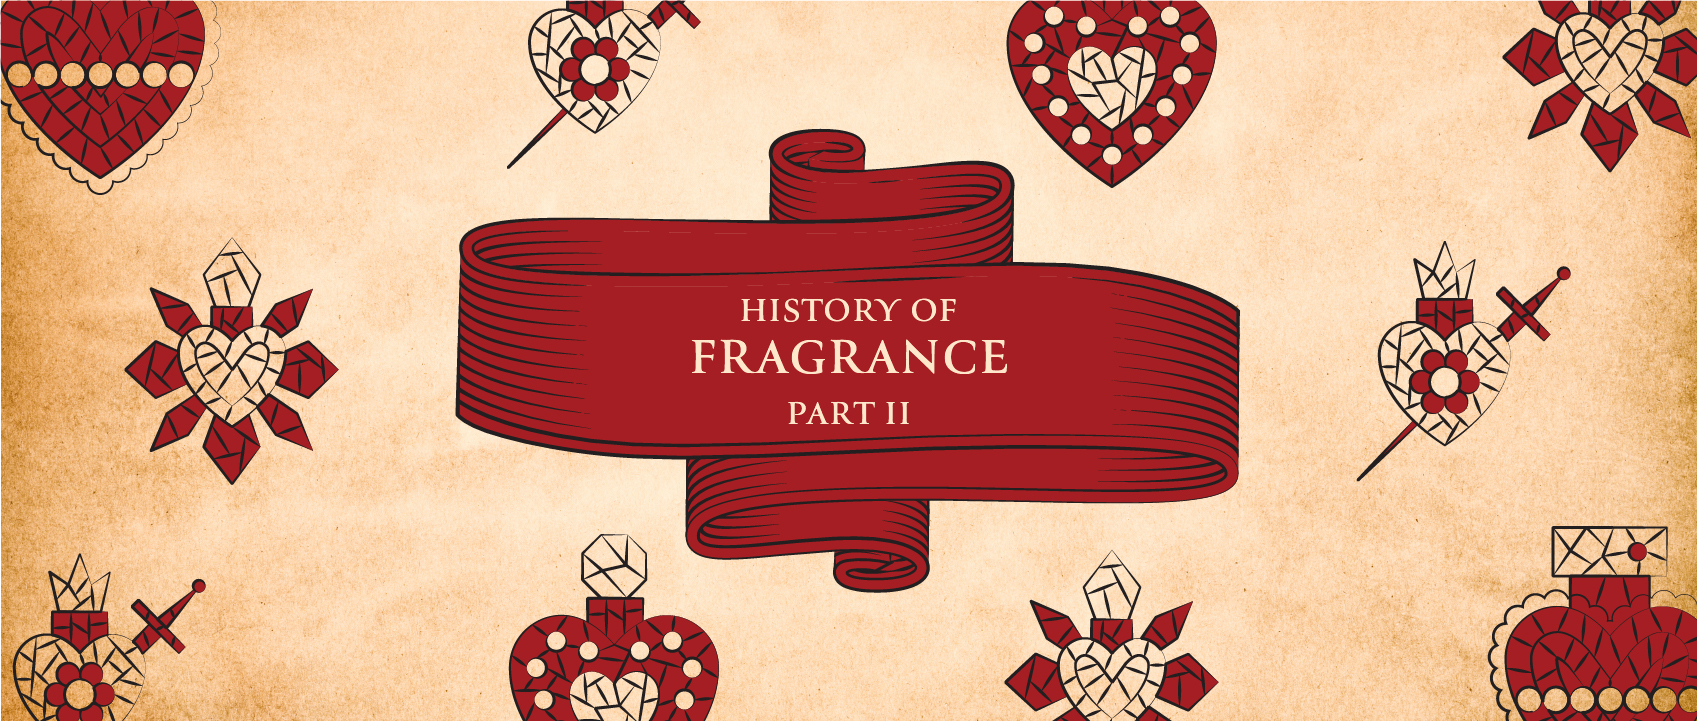 history of fragrance part 2 with illustrations of perfume bottles